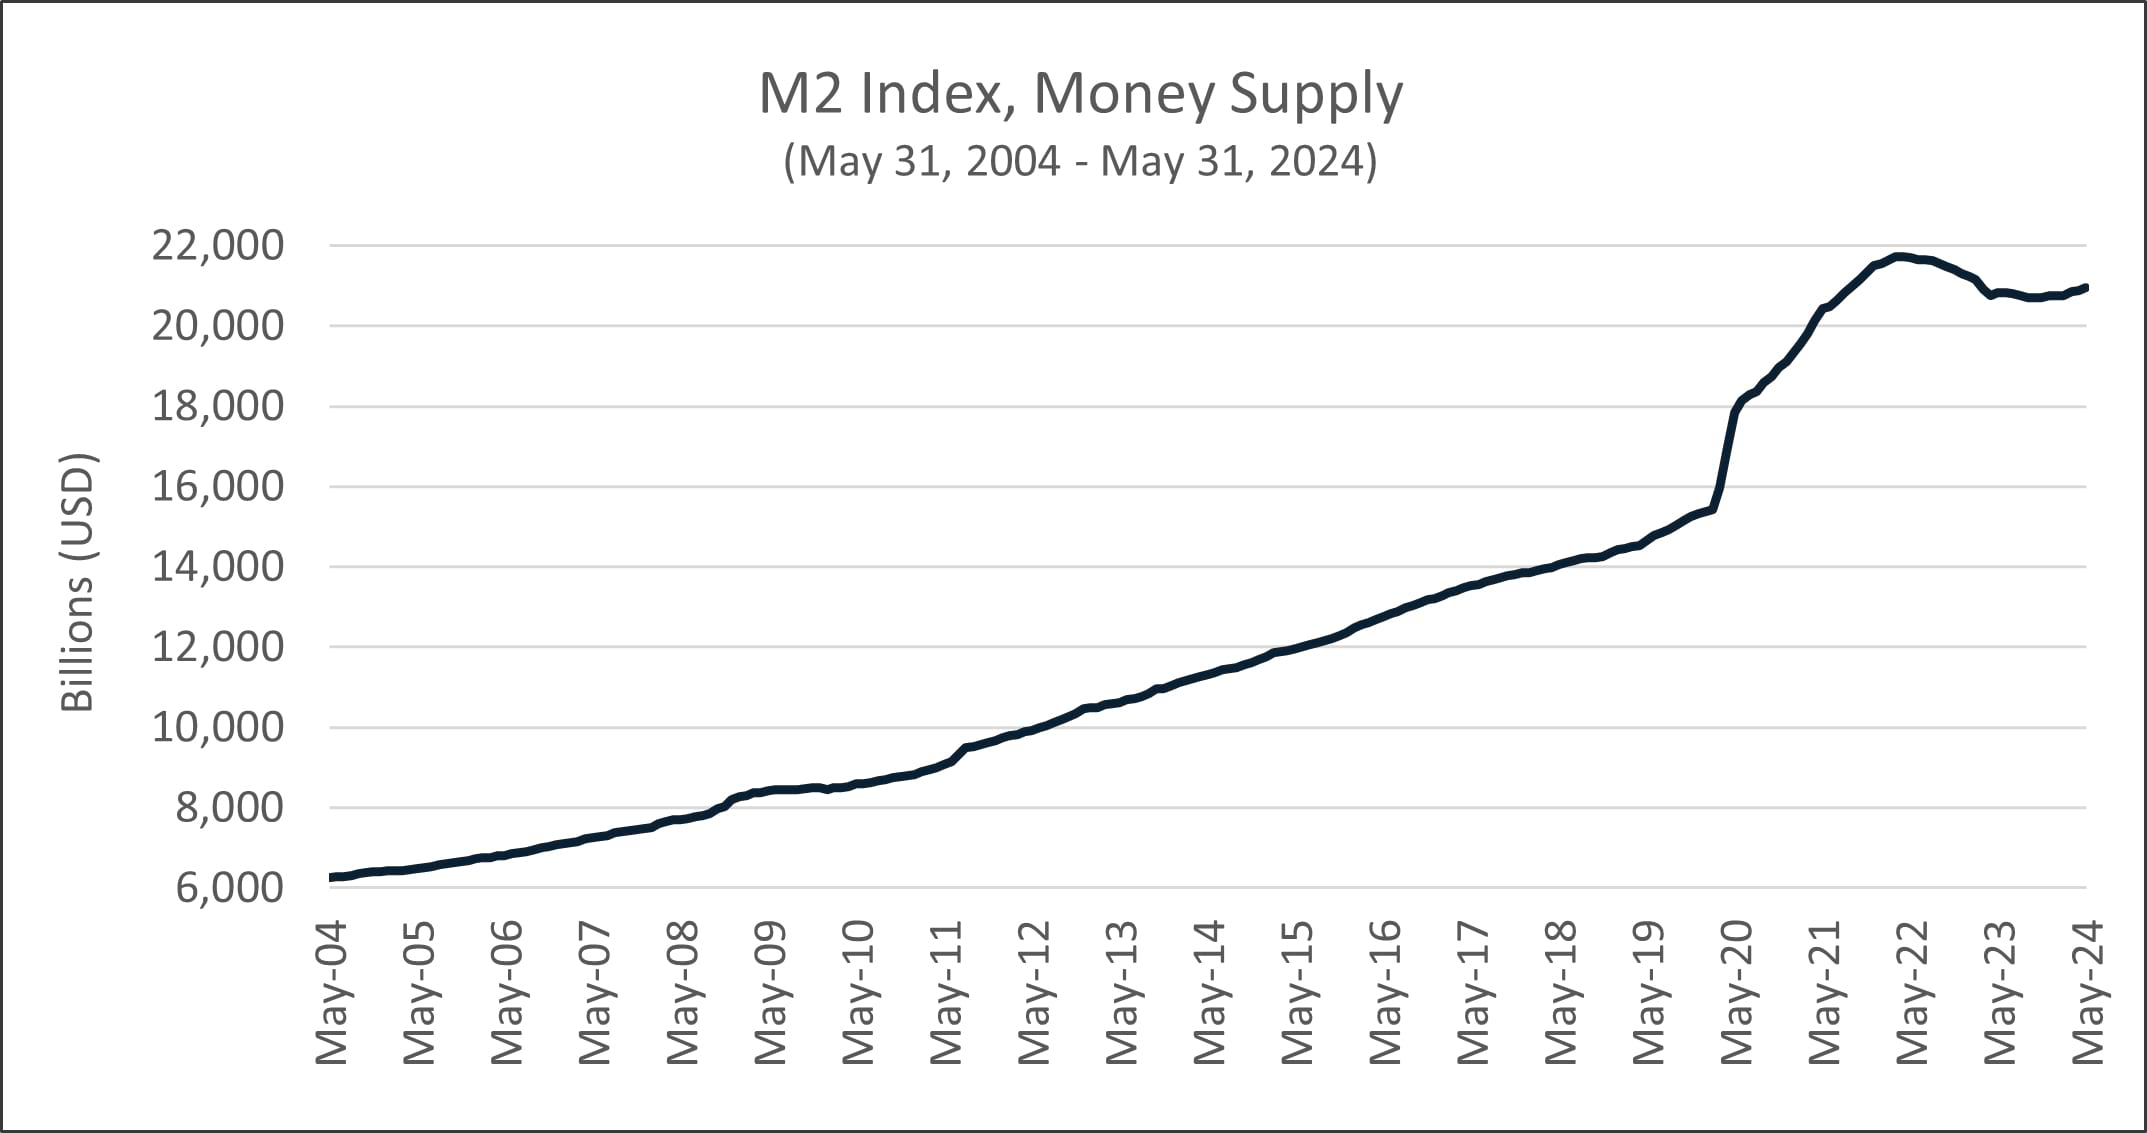 M2 Index, Money Supply chart from 5-31-04 to 5-31-24